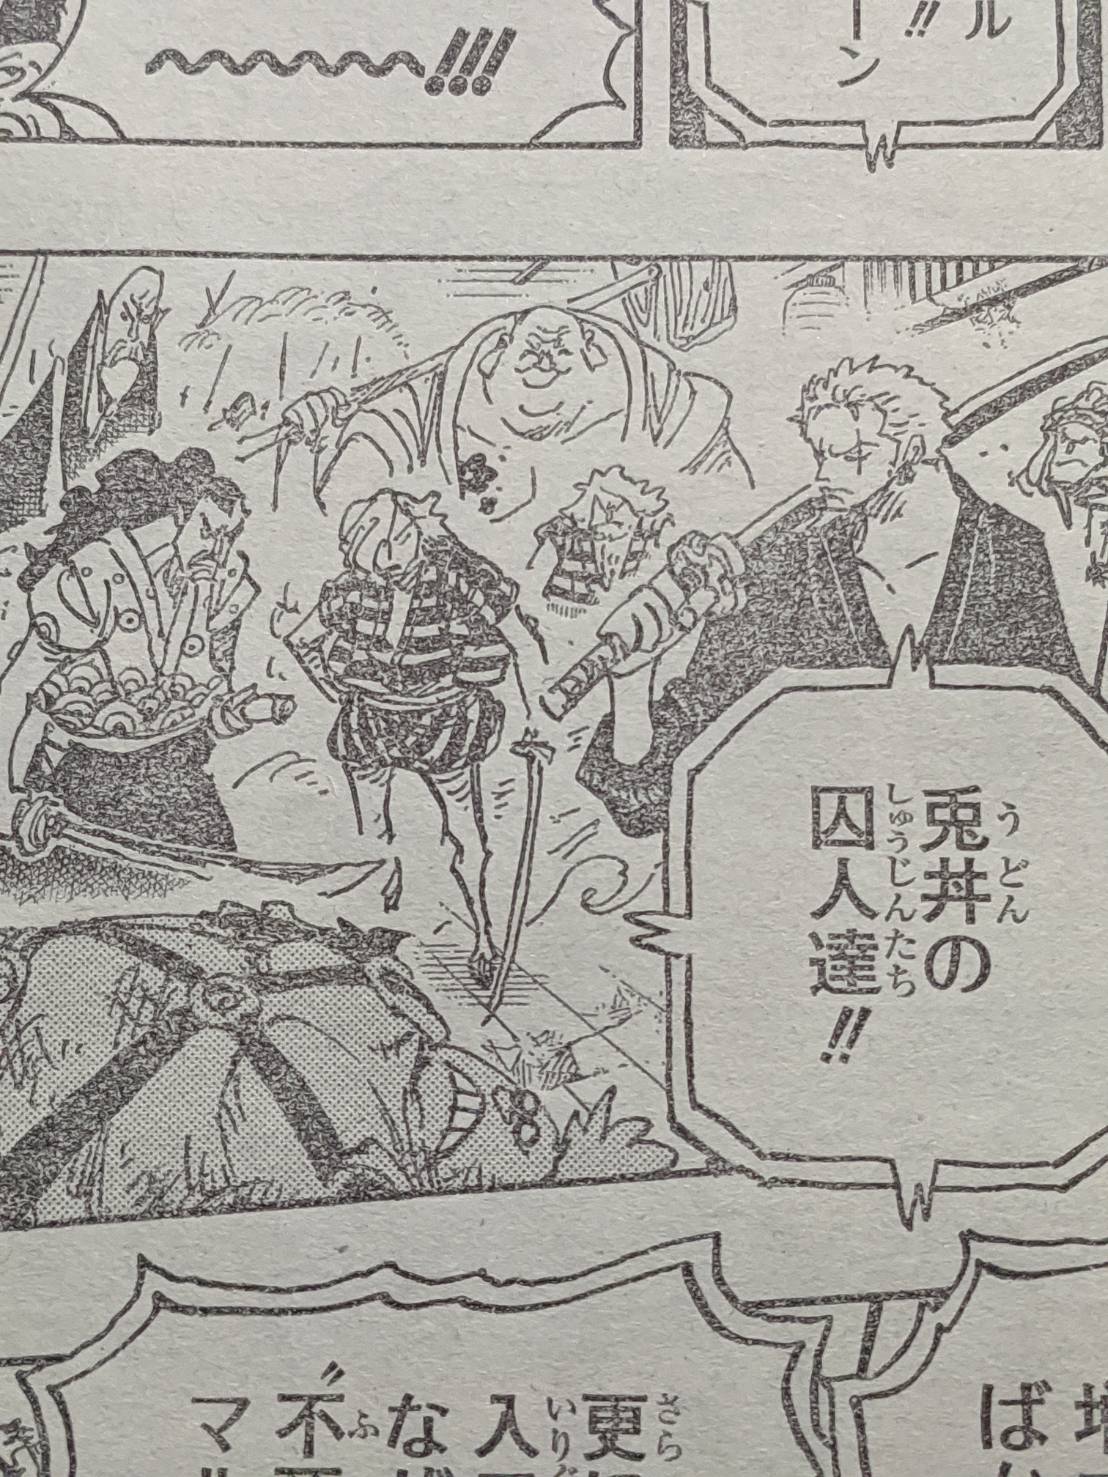 Onepiece9話考察 ゾロvsササキ 閻魔の真骨頂 覇王色覚醒の気配 ワンピース考察 甲塚誓ノ介のいい芝居してますね Part 3